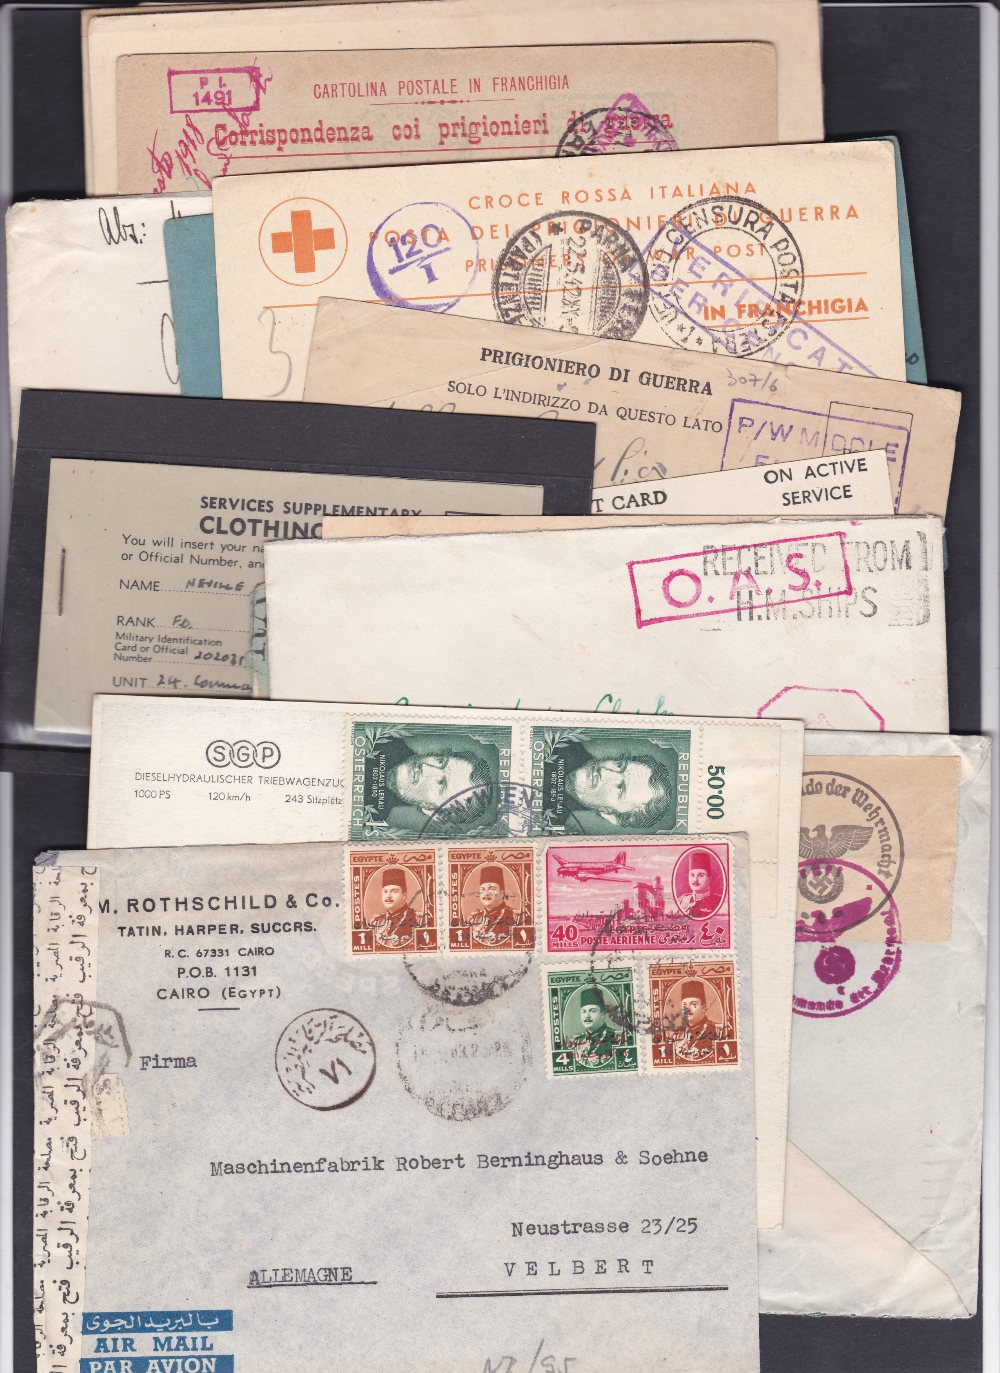 POSTAL HISTORY, CENSORED MAIL, selection of covers and cards from around the world all with censor